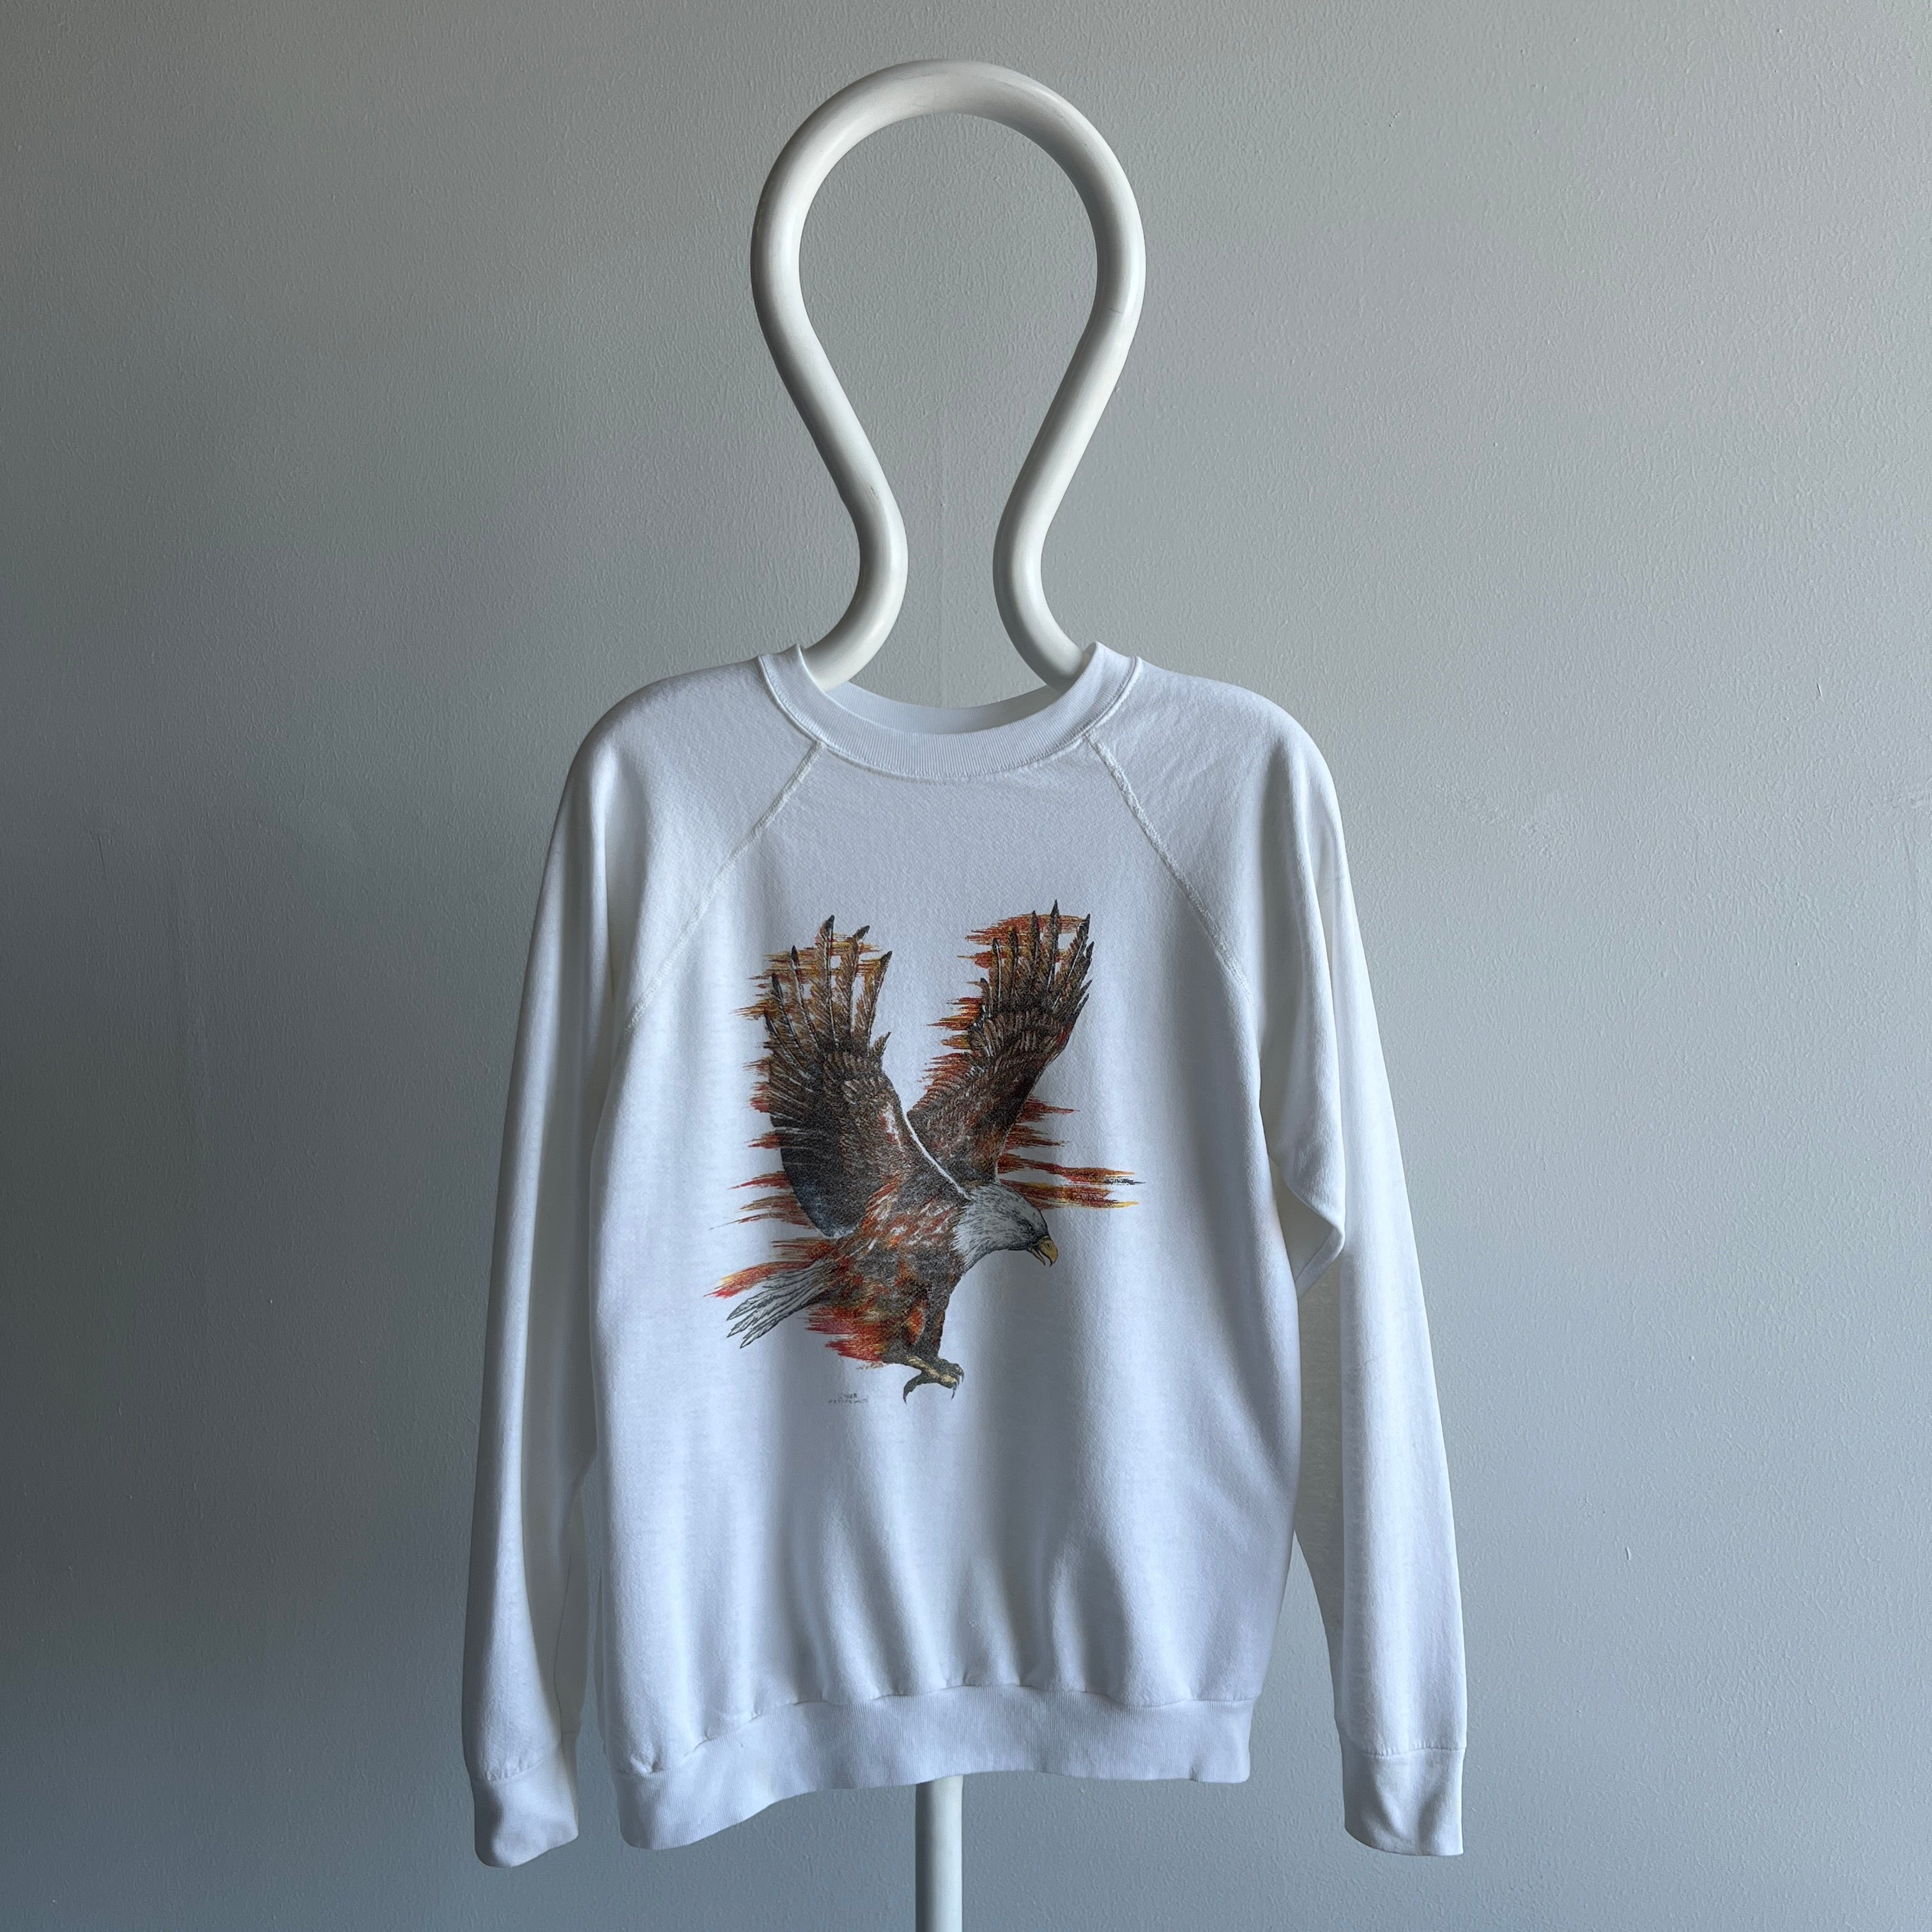 1988 Eagle Thinned Out Sweatshirt